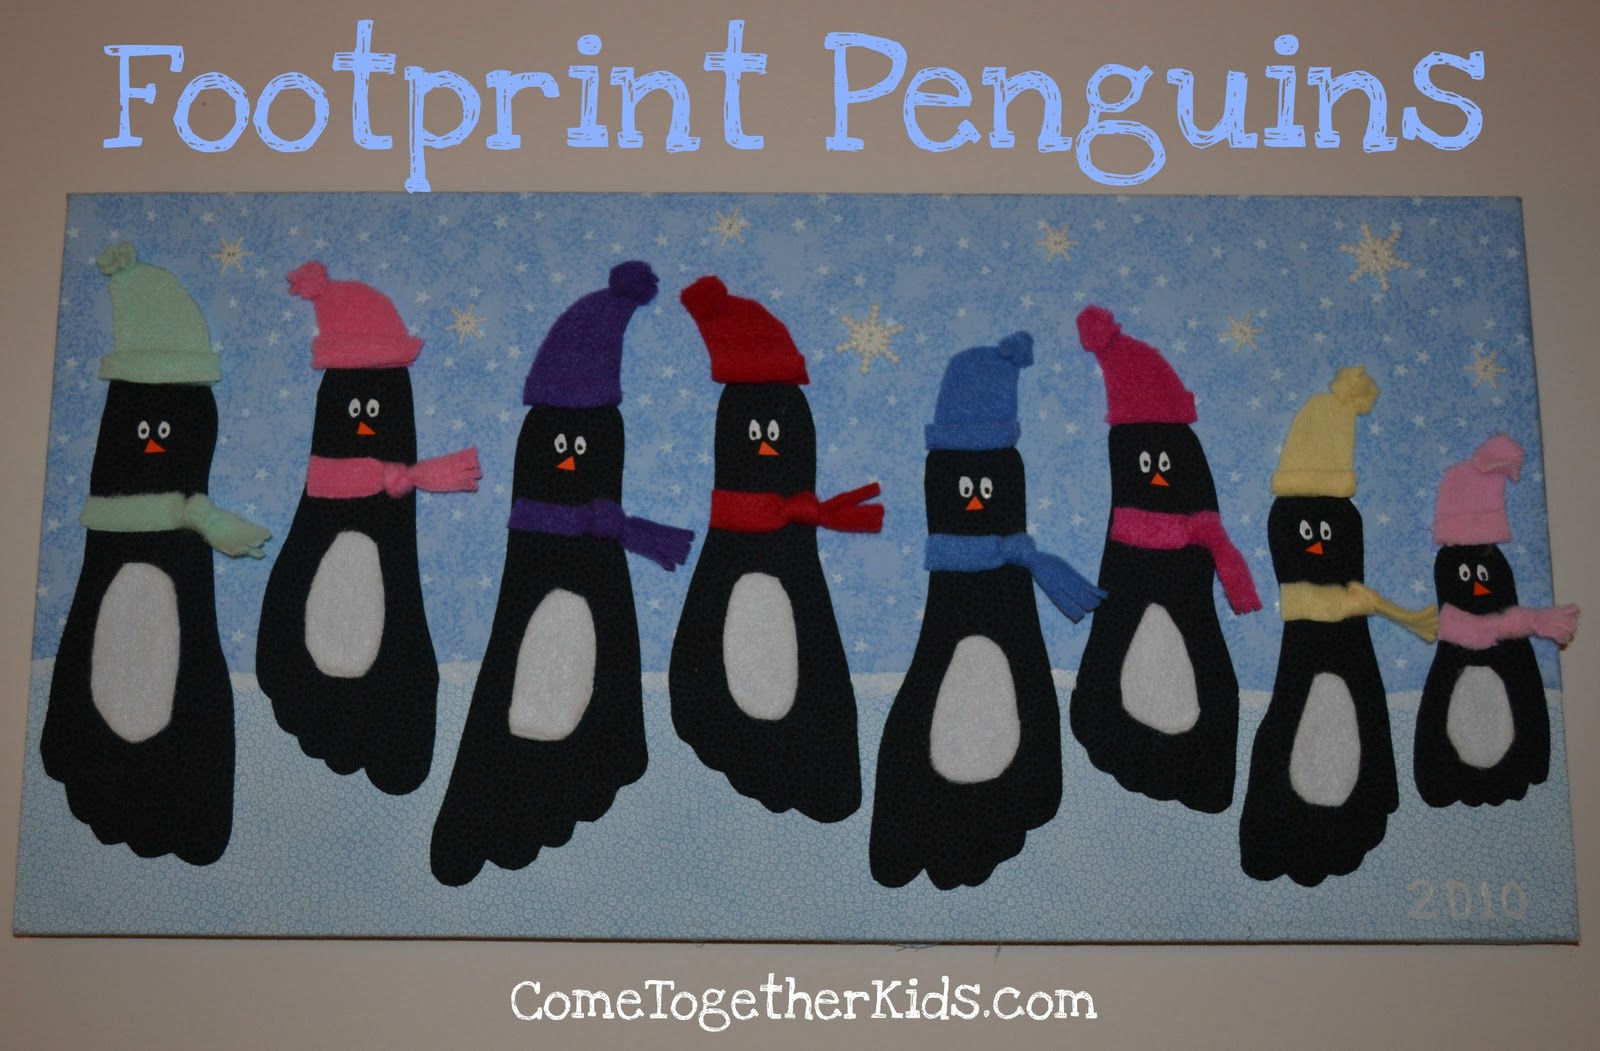 AD-Creative-Handprint-And-Footprint-Crafts-For-Christmas-18